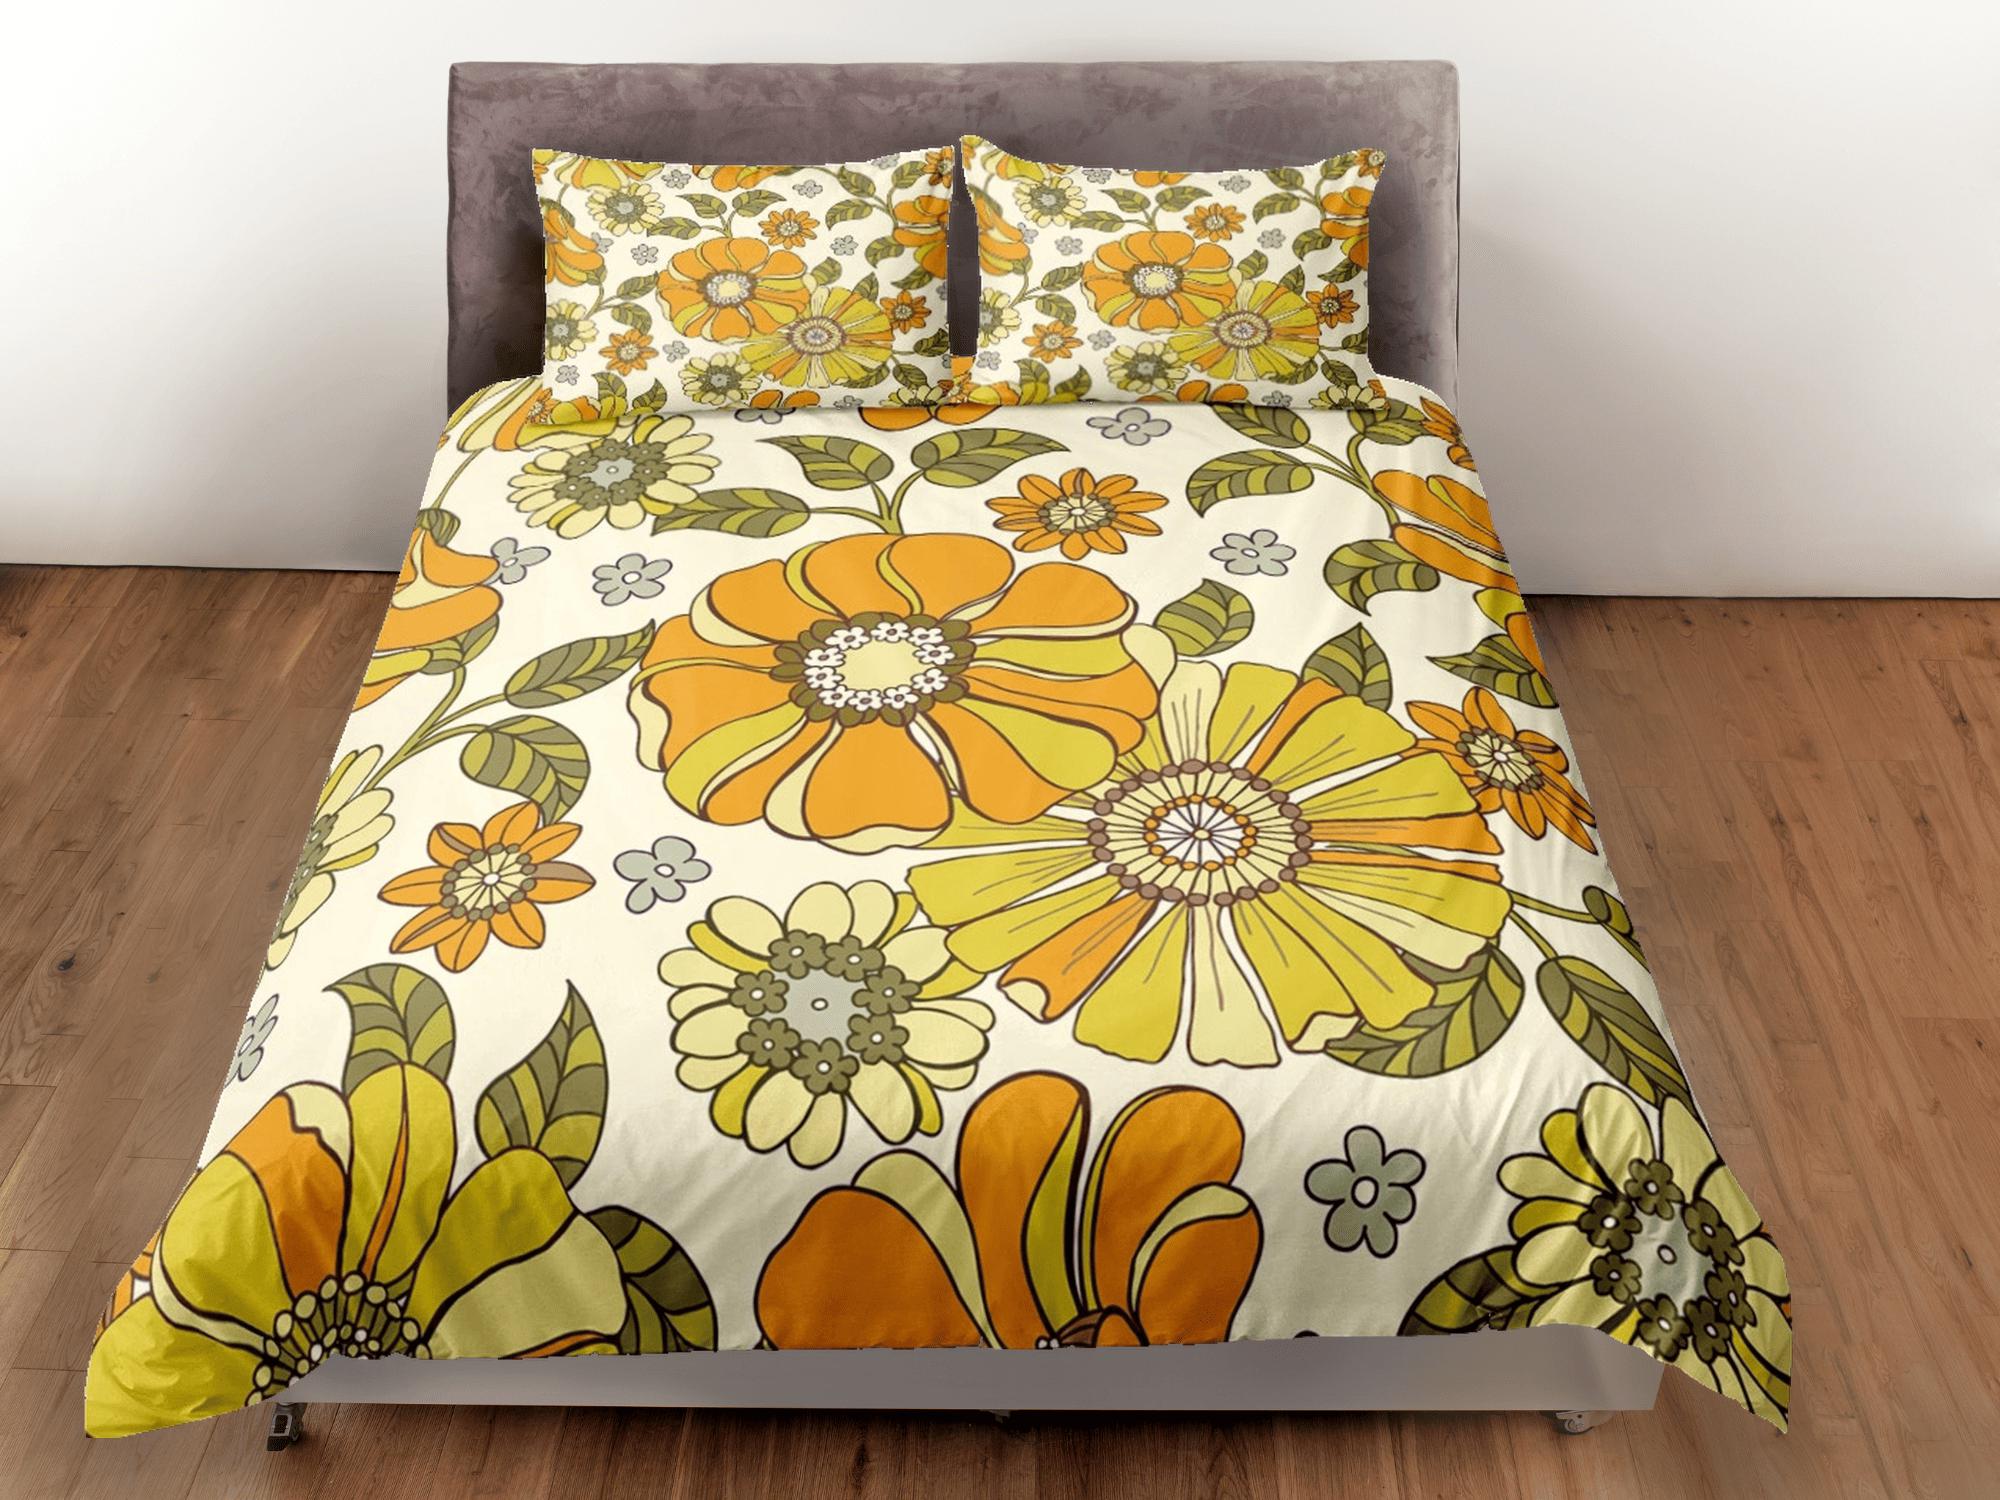 daintyduvet Orange daisies retro bedding mid century modern floral duvet cover colorful bed cover, vintage style boho chic bedspread aesthetic bedding